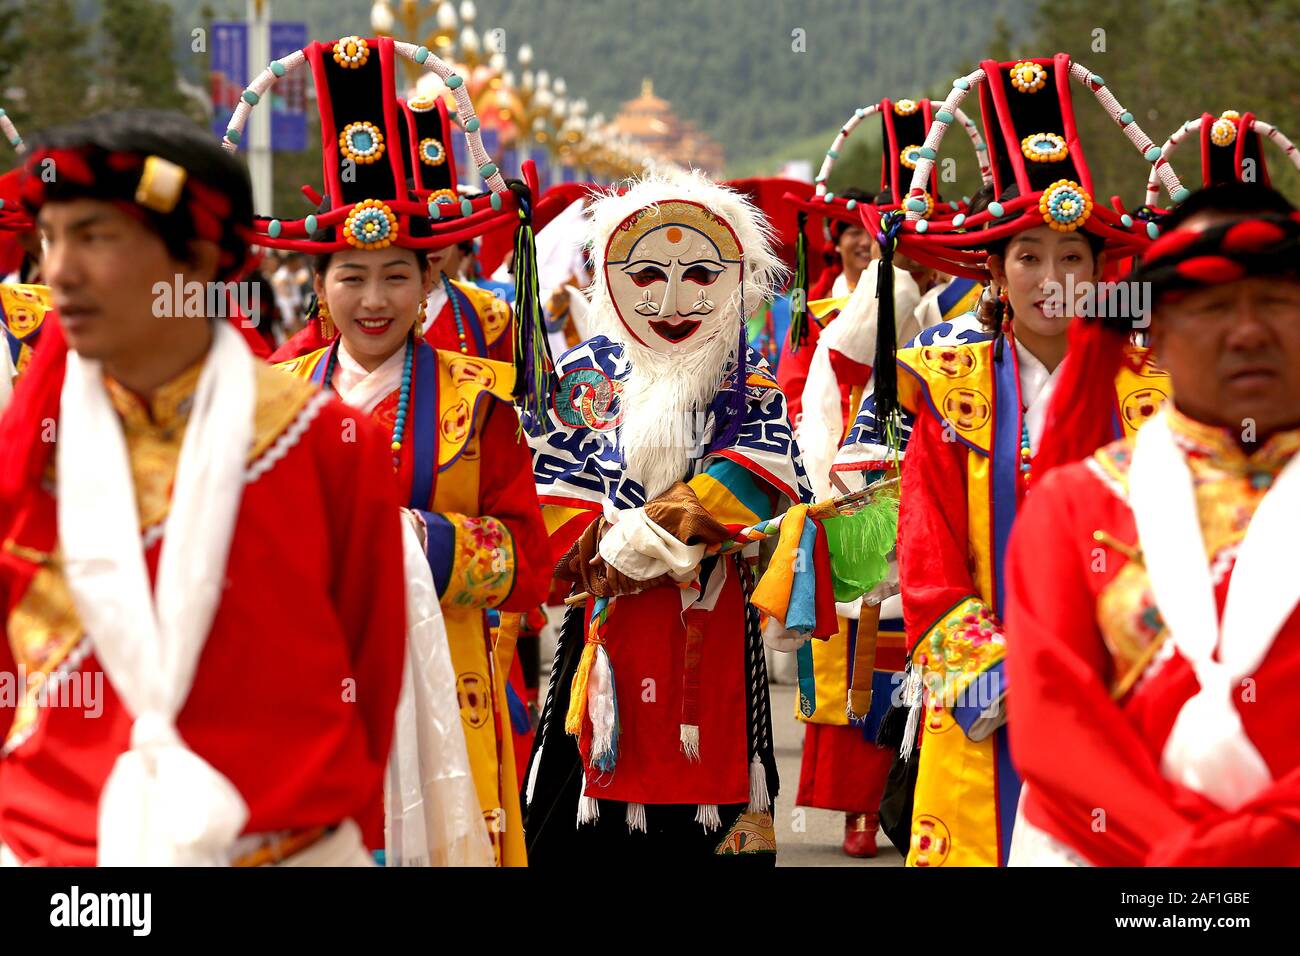 Gannan, China. 12th Dec, 2019. Tibetans dressed in ethnic clothing and costumes, celebrate the opening of the Dunhuang Silk Road International Tourism Festival held in Gannan, a major city in Gansu Province's Tibetan Autonomous Region, on Tuesday, August 30, 2019. The area is a key part of China's massive Belt and Road Initiative, where future development will help alleviate poverty and improve education in the Tibetan region. Photo by Stephen Shaver/UPI Credit: UPI/Alamy Live News Stock Photo